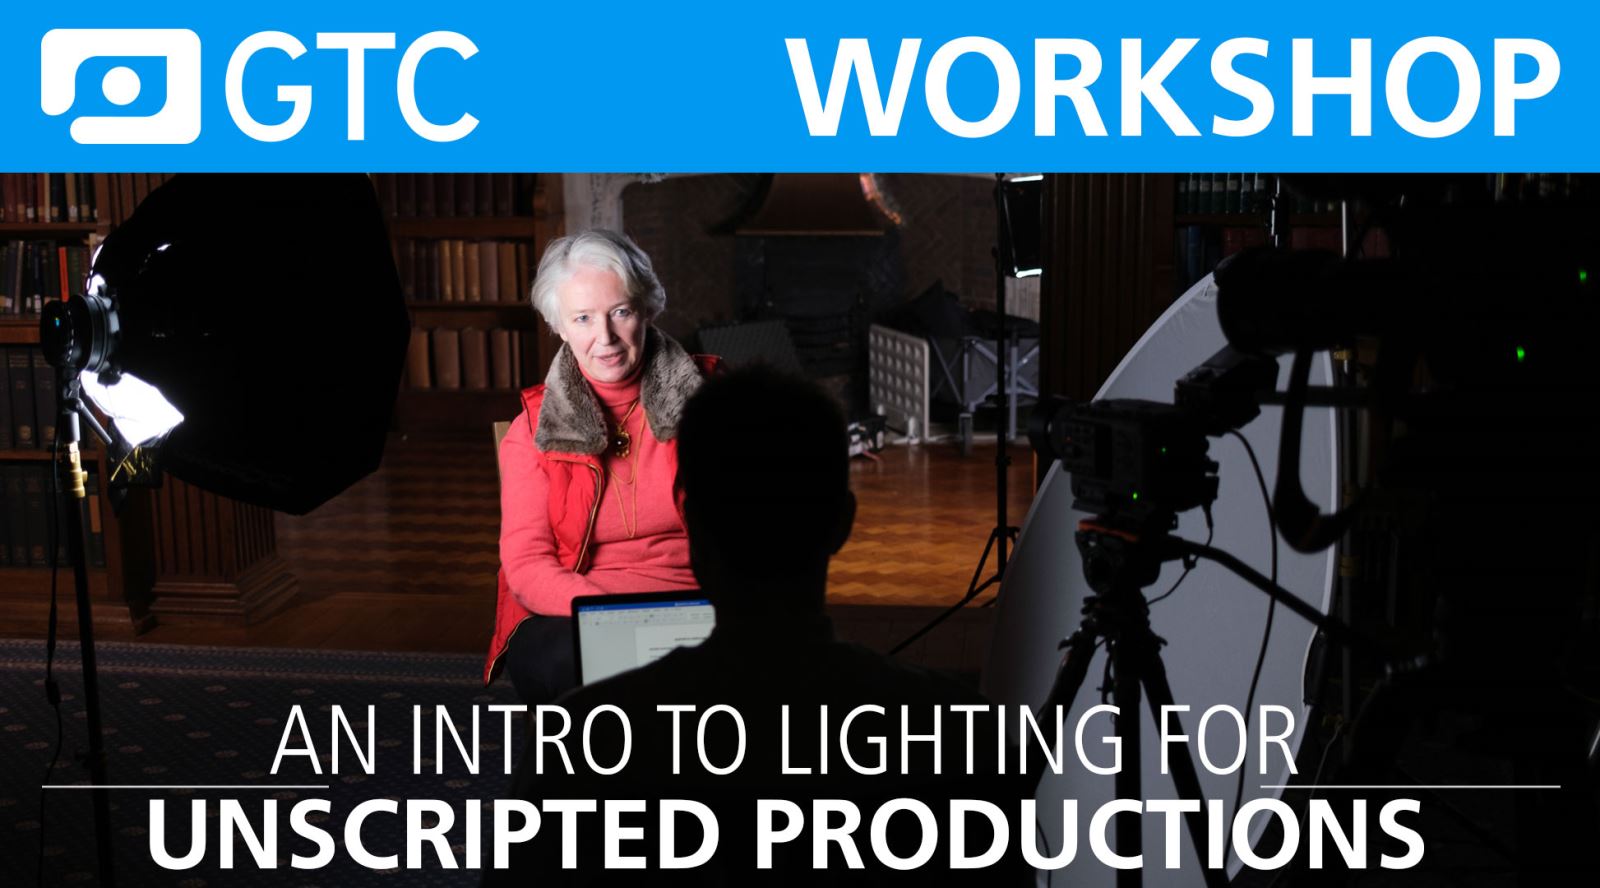 GTC Workshop - An introduction to lighting for unscripted productions